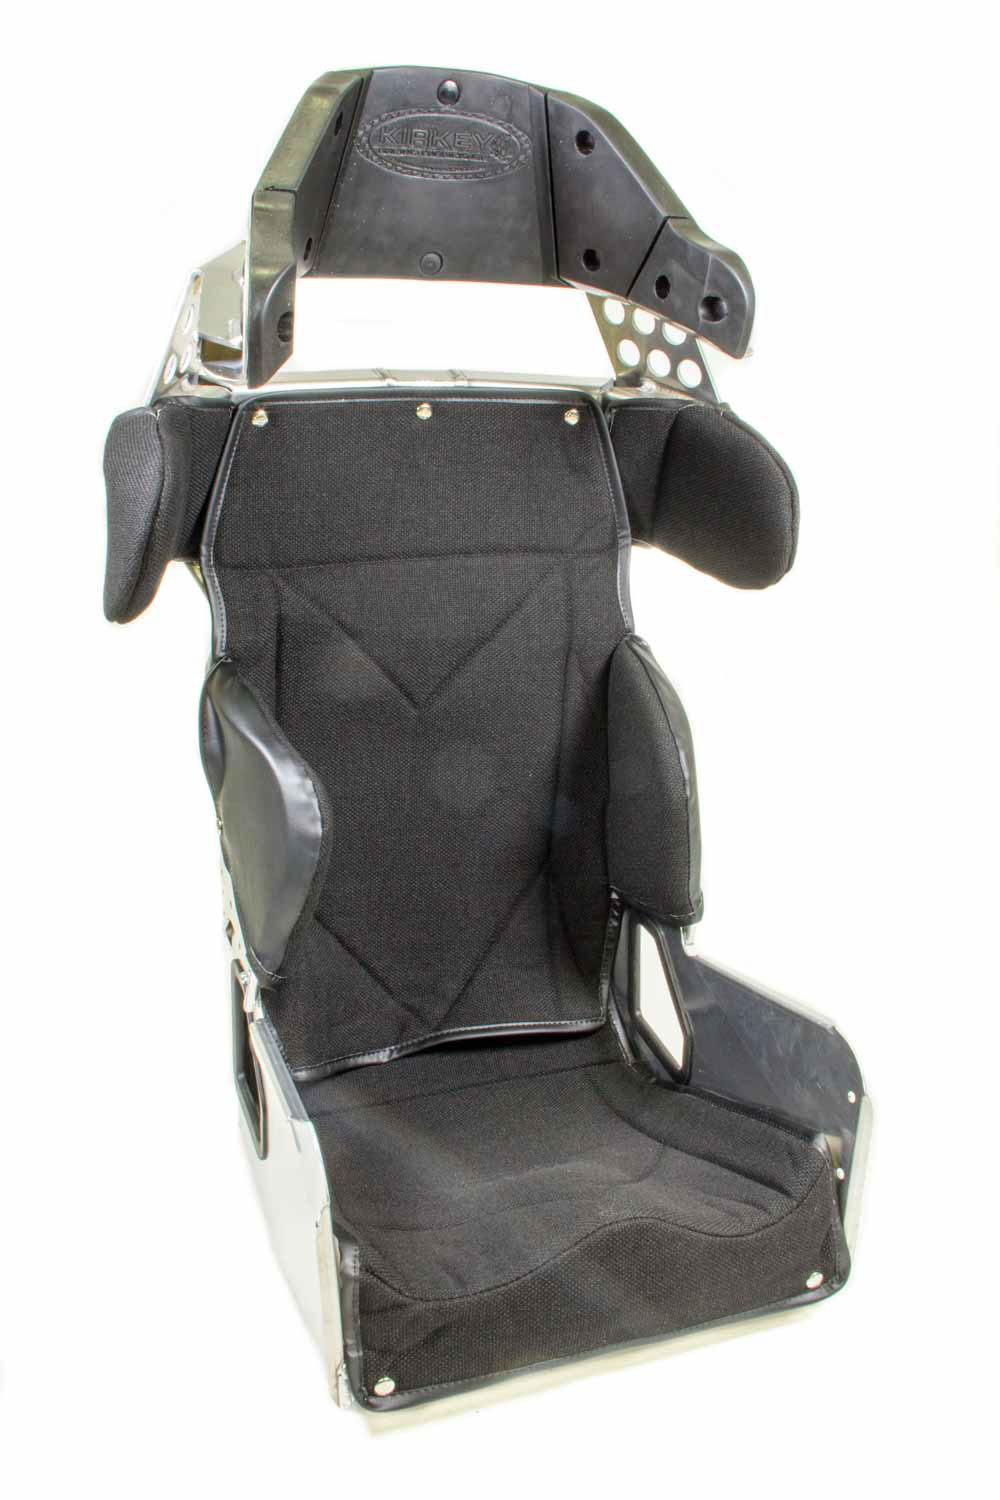 Adjustable Layback Kirkey Racing Aluminum Road Race Seat with Cover